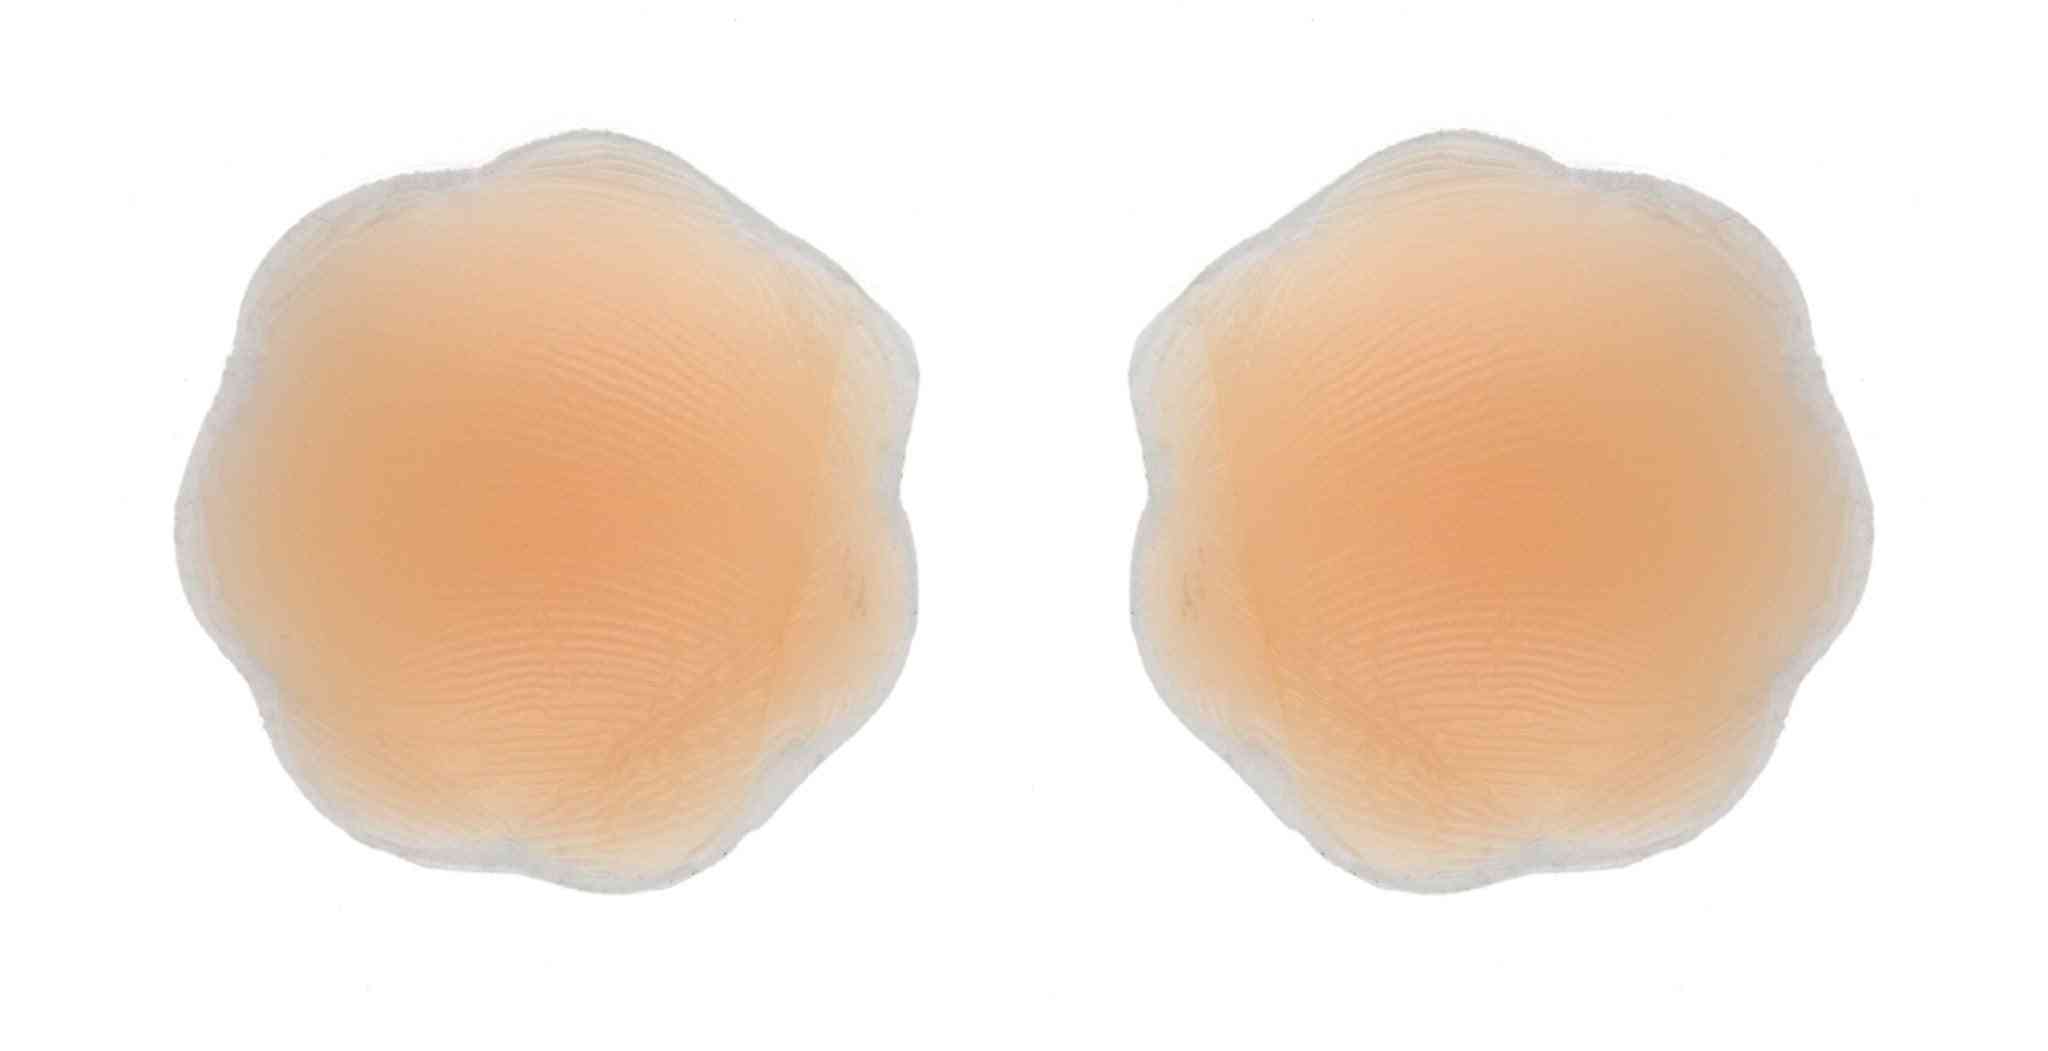 Reusable Adhesive Silicone Concealers (light & Dark)